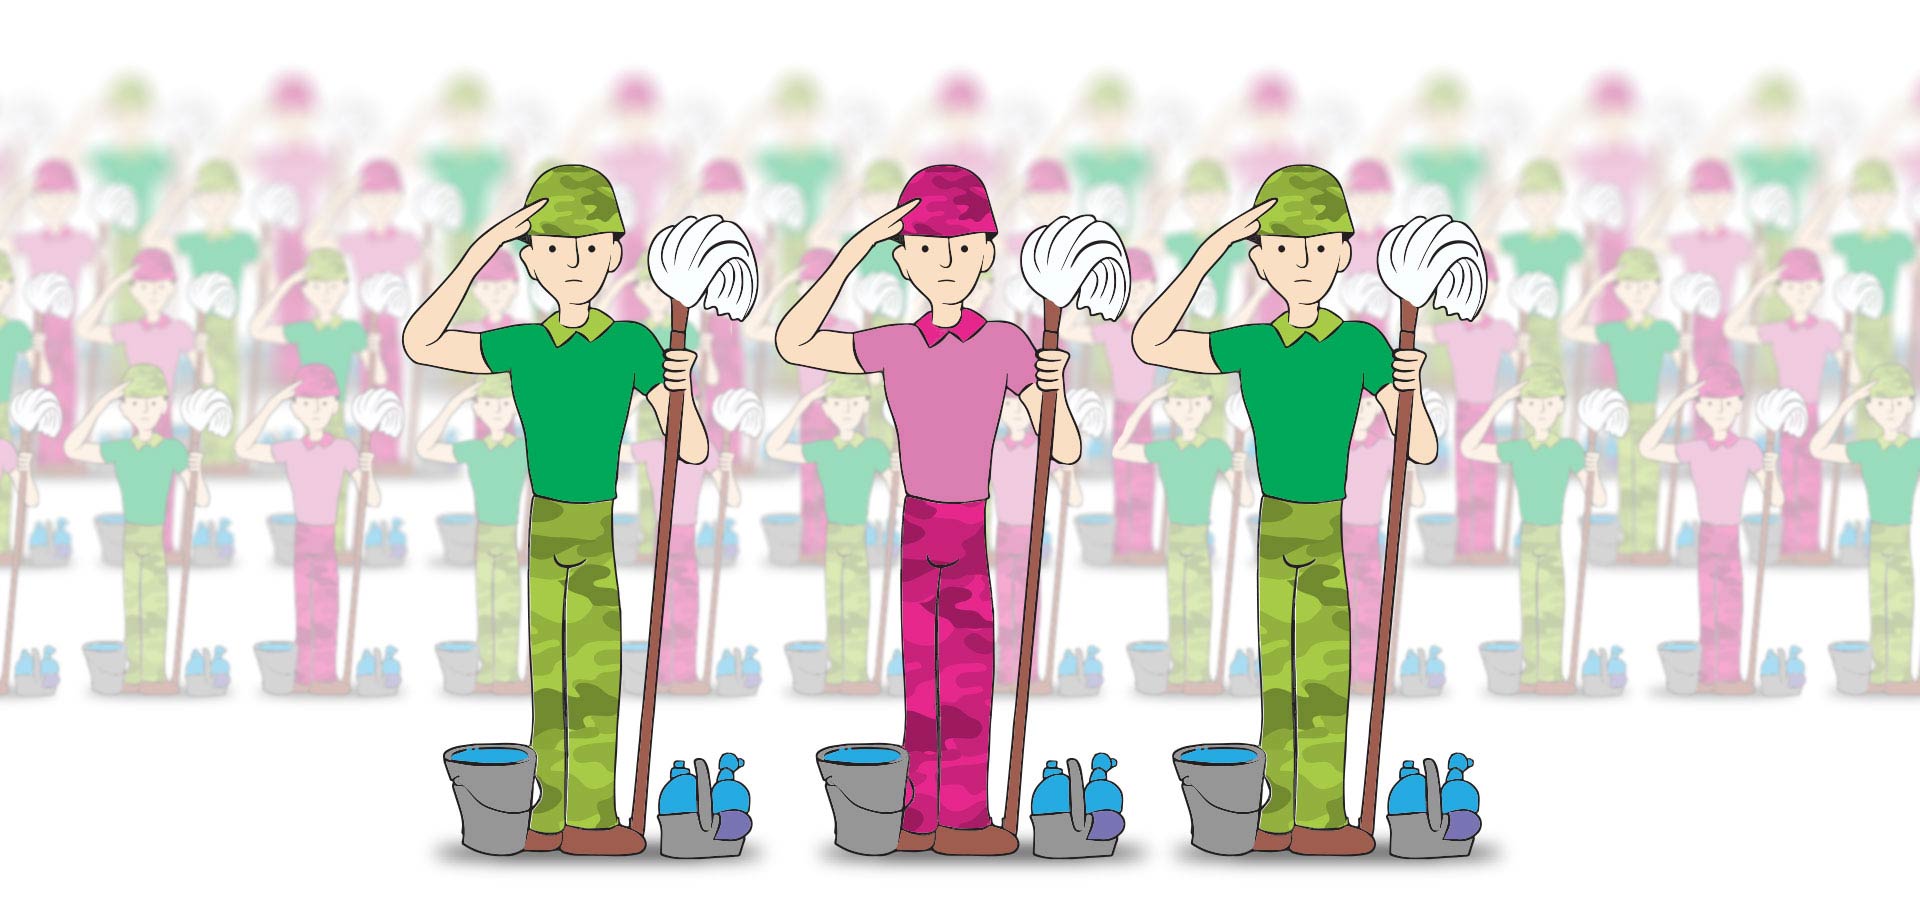 Illustration of cleaning soldiers standing at attention holding mops.